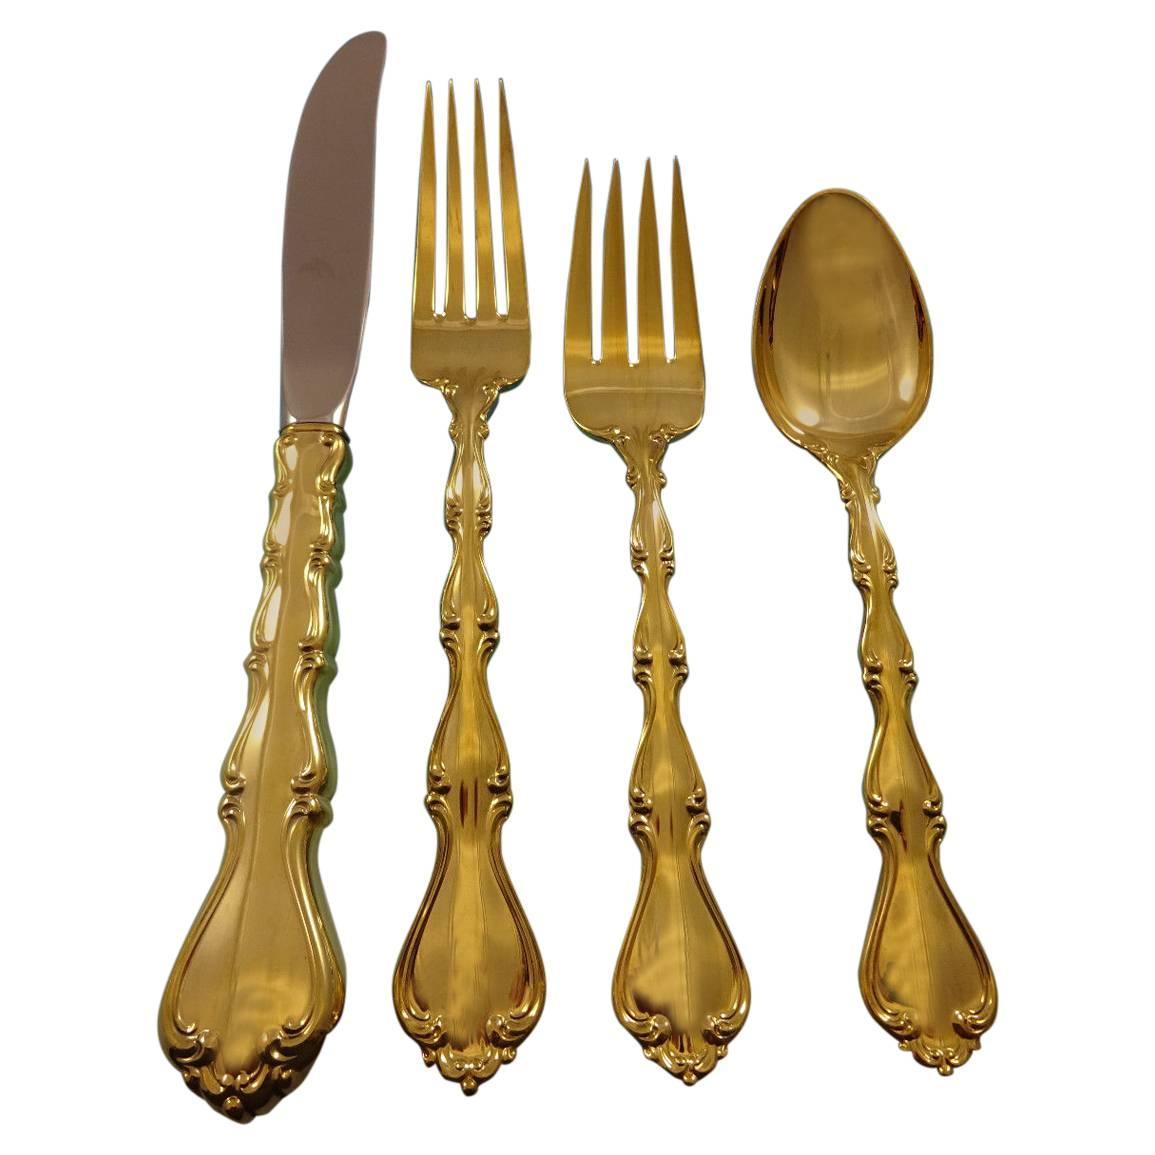 Country Manor by Towle Sterling Silver Flatware Service for 12, Set Vermeil Gold